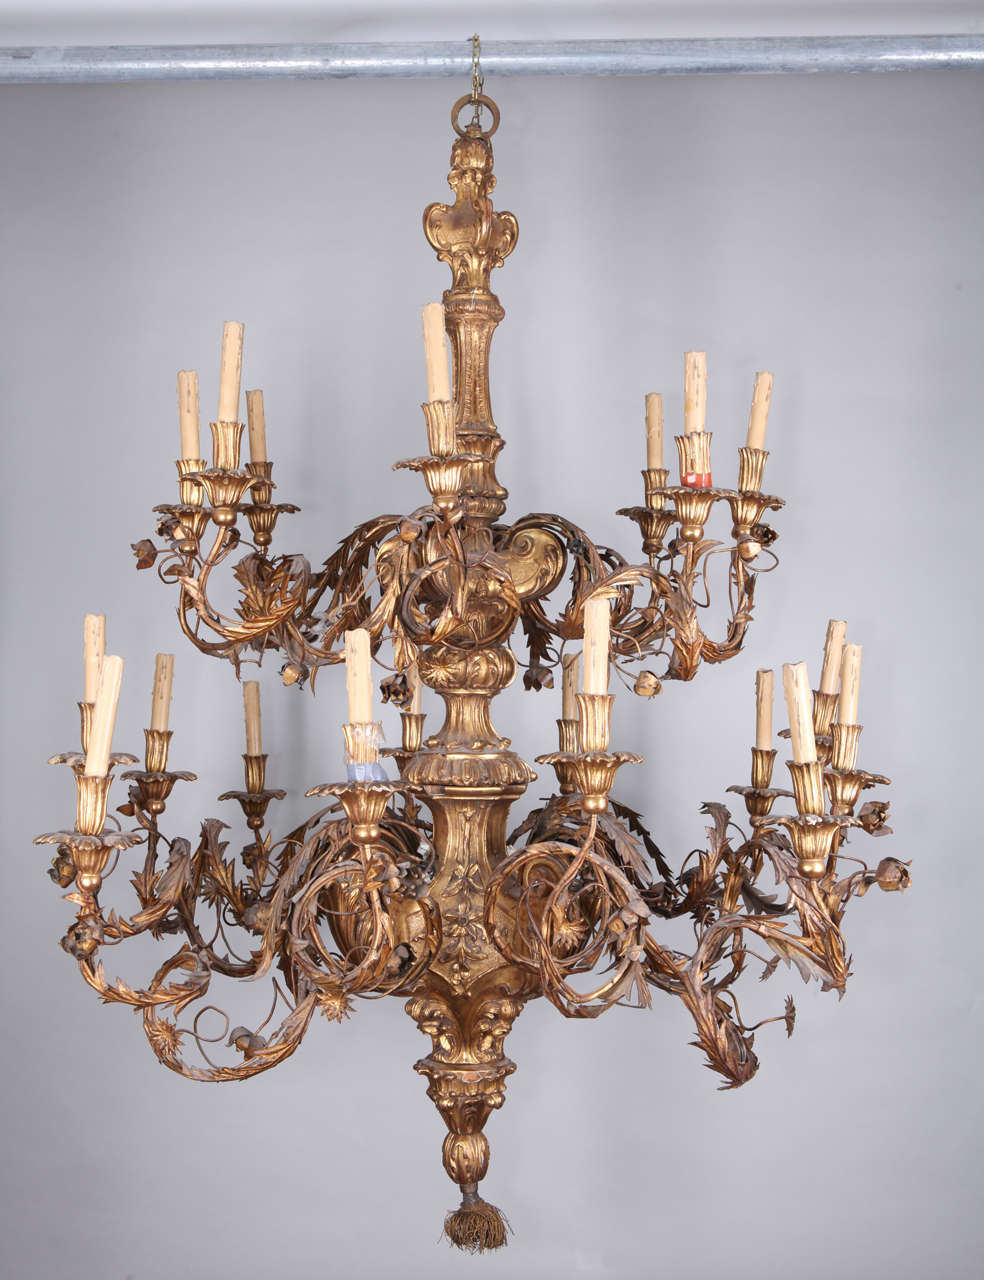 Chandelier In wood and wrought iron with 18 lights venice 18 sec